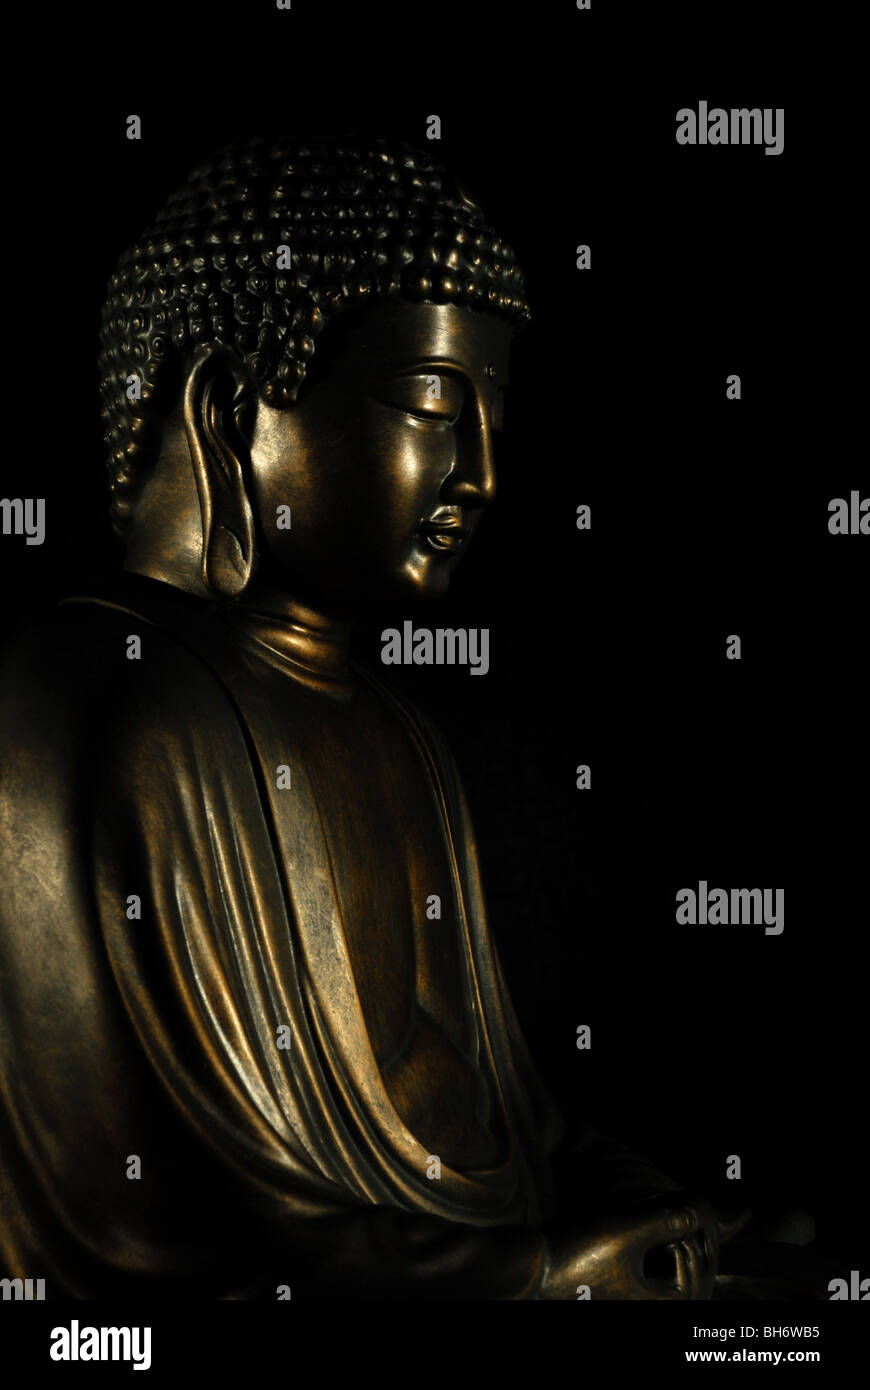 Bronze Buddha statue with a dark background and highlighted features Stock Photo